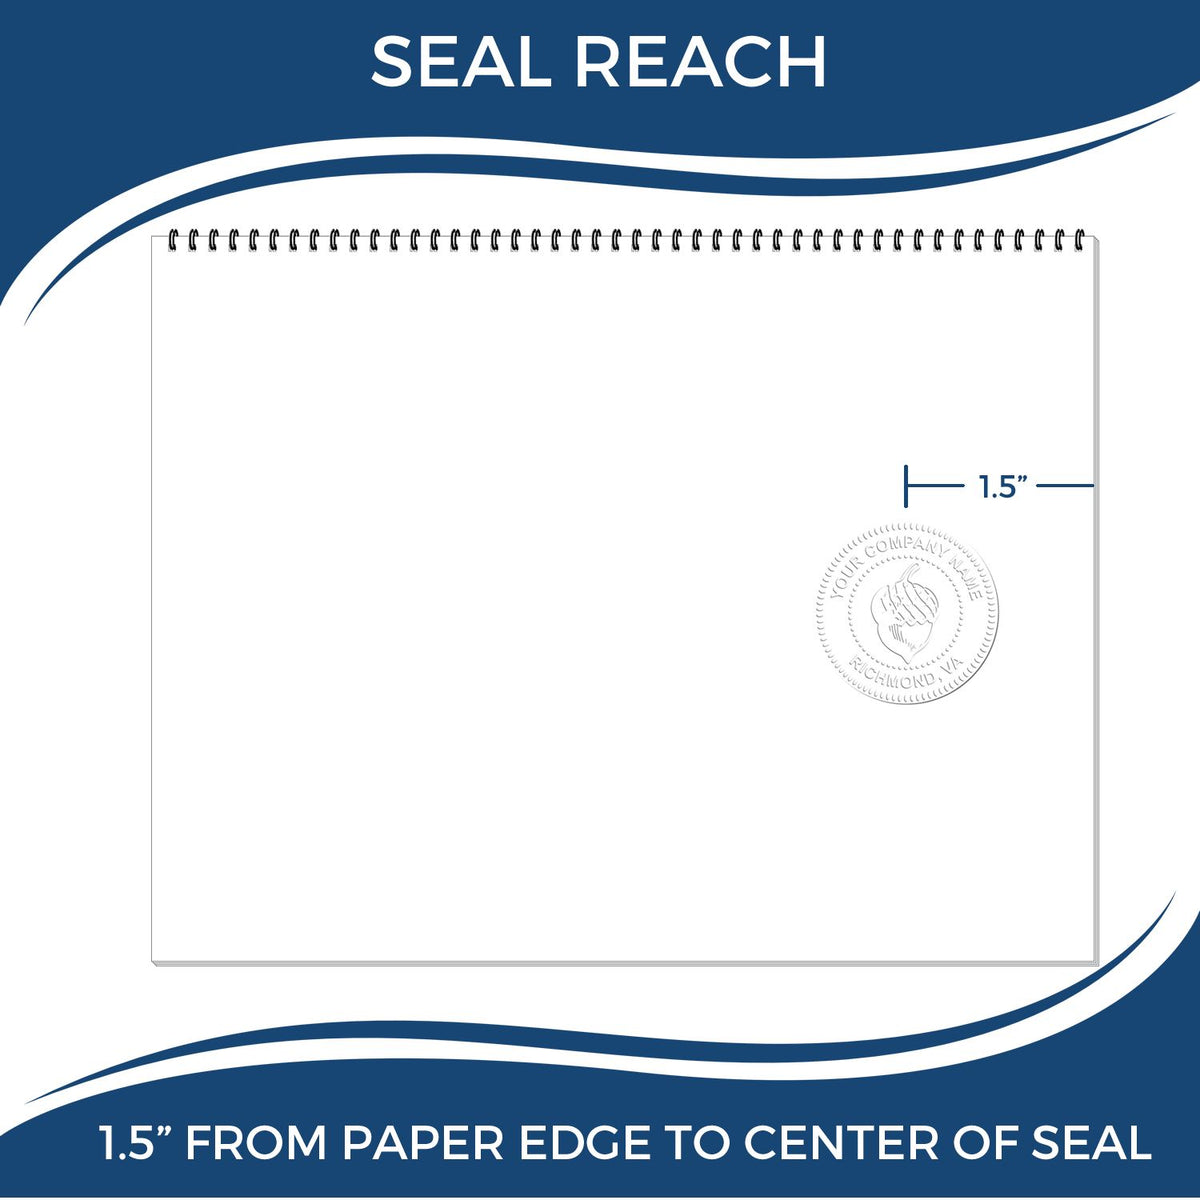 An infographic showing the seal reach which is represented by a ruler and a miniature seal image of the Hybrid Pennsylvania Architect Seal